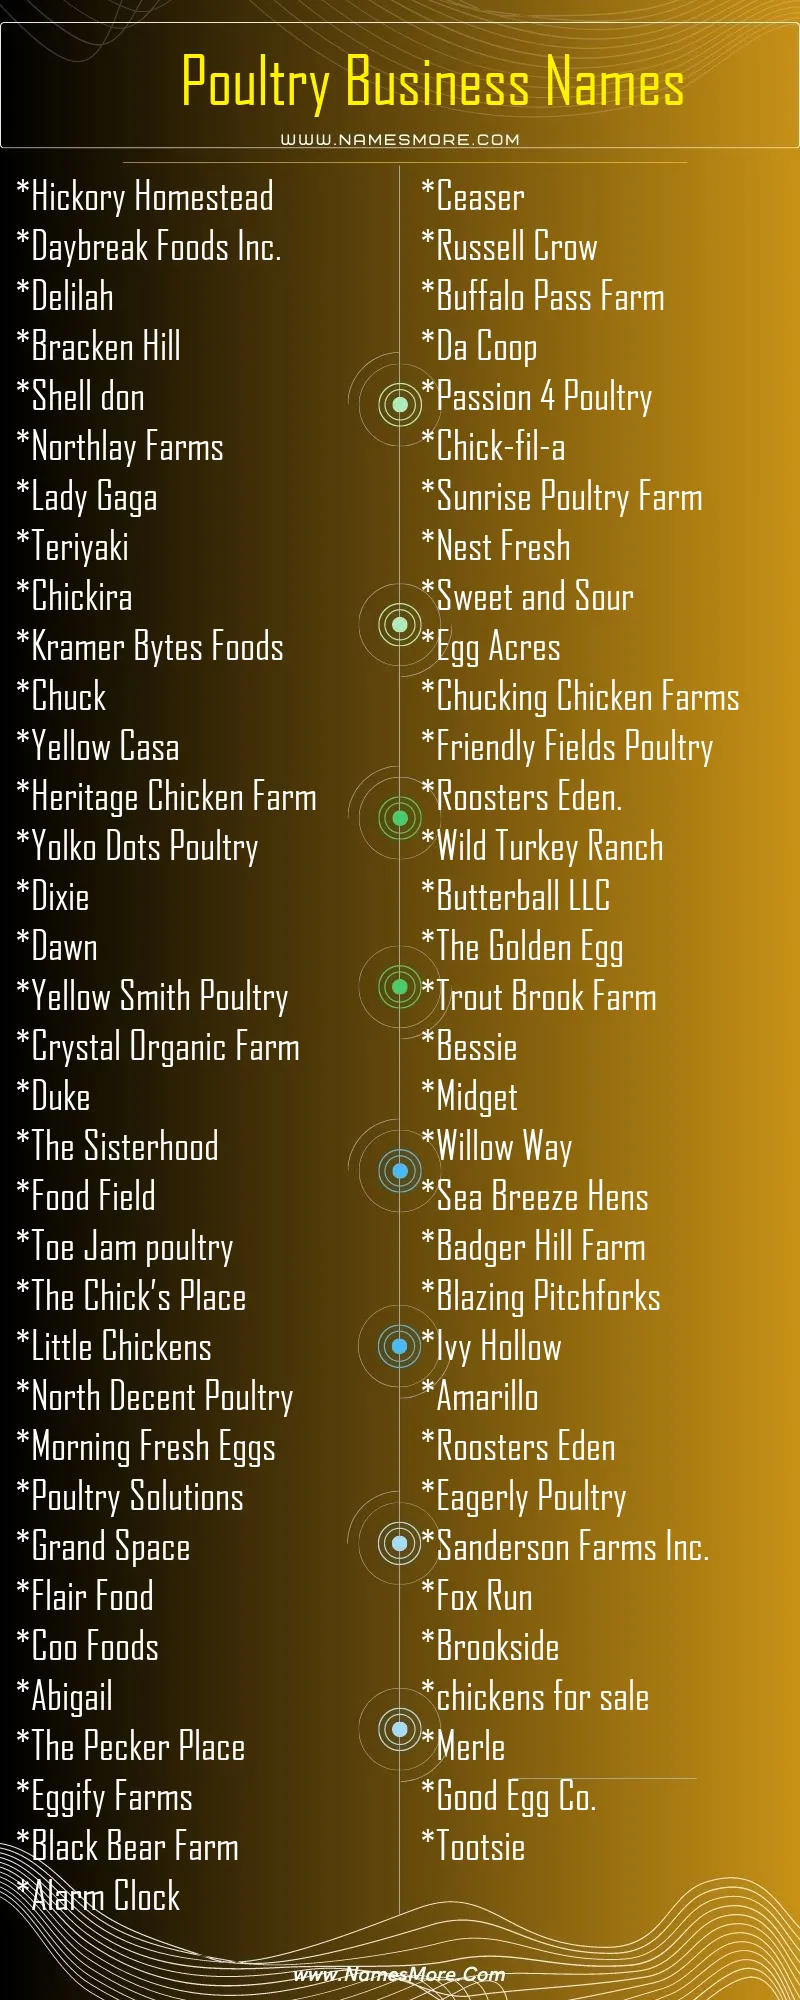 Poultry Business Names List Infographic